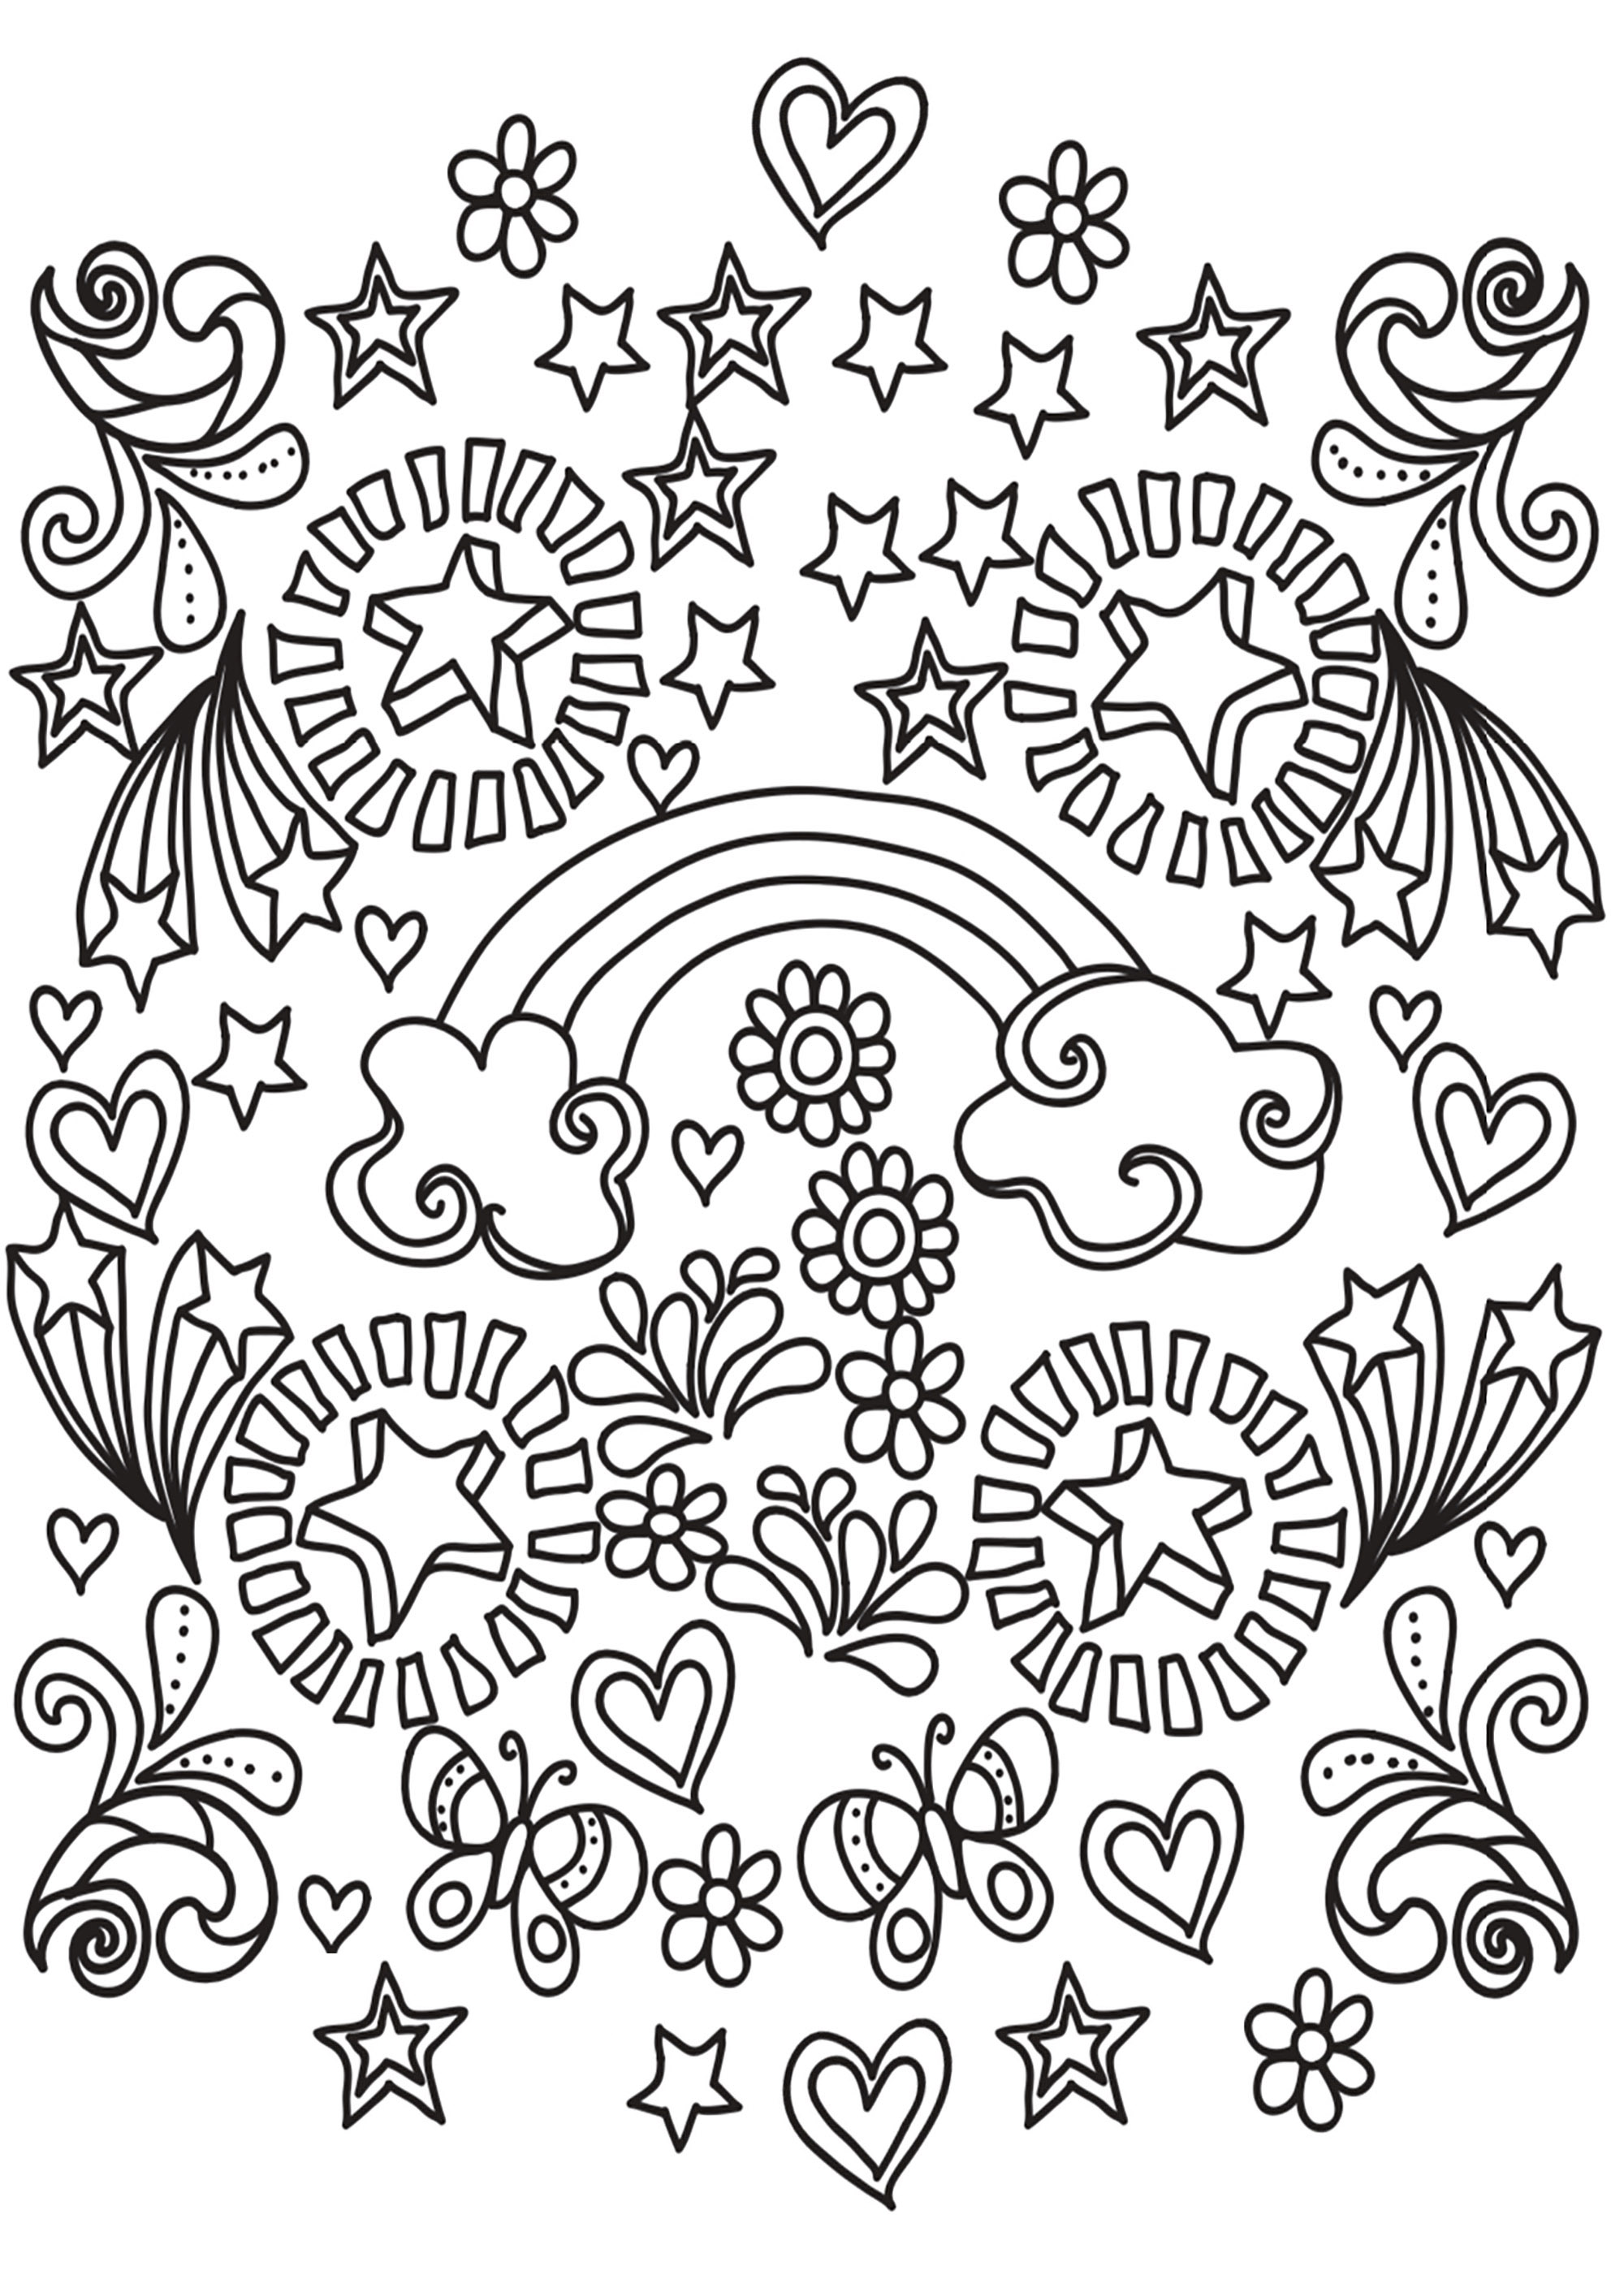 A Doodle full of shapes, subjects and motifs representing joie de vivre. Stars, hearts, rainbows, butterflies... You'll finish this coloring book with a big smile!